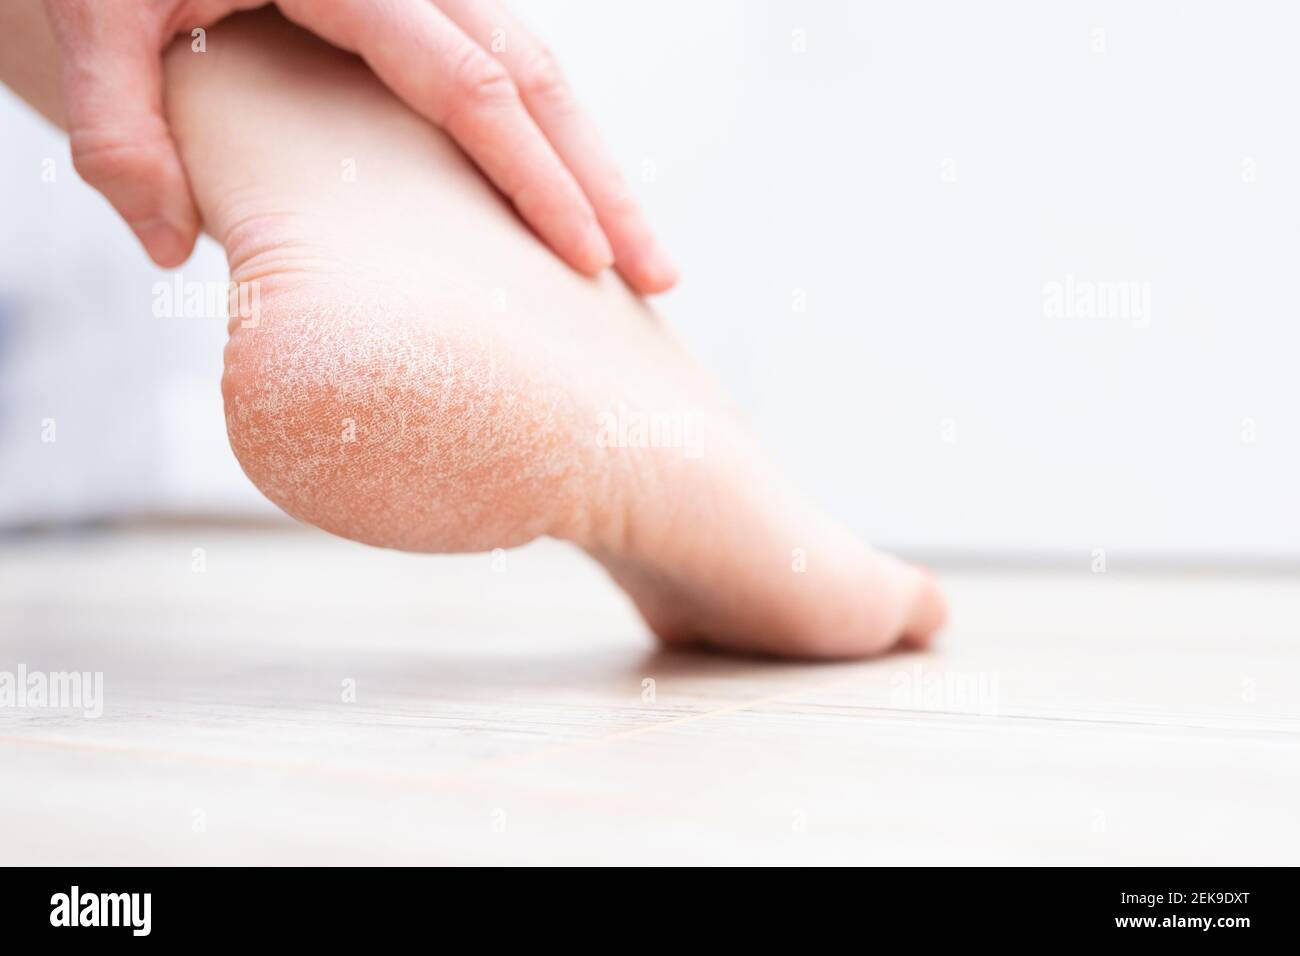 The dry skin on the heel is cracked. Treatment concept with moisturizing creams and exfoliation for healing wounds and pain when walking. Dehydrated Stock Photo